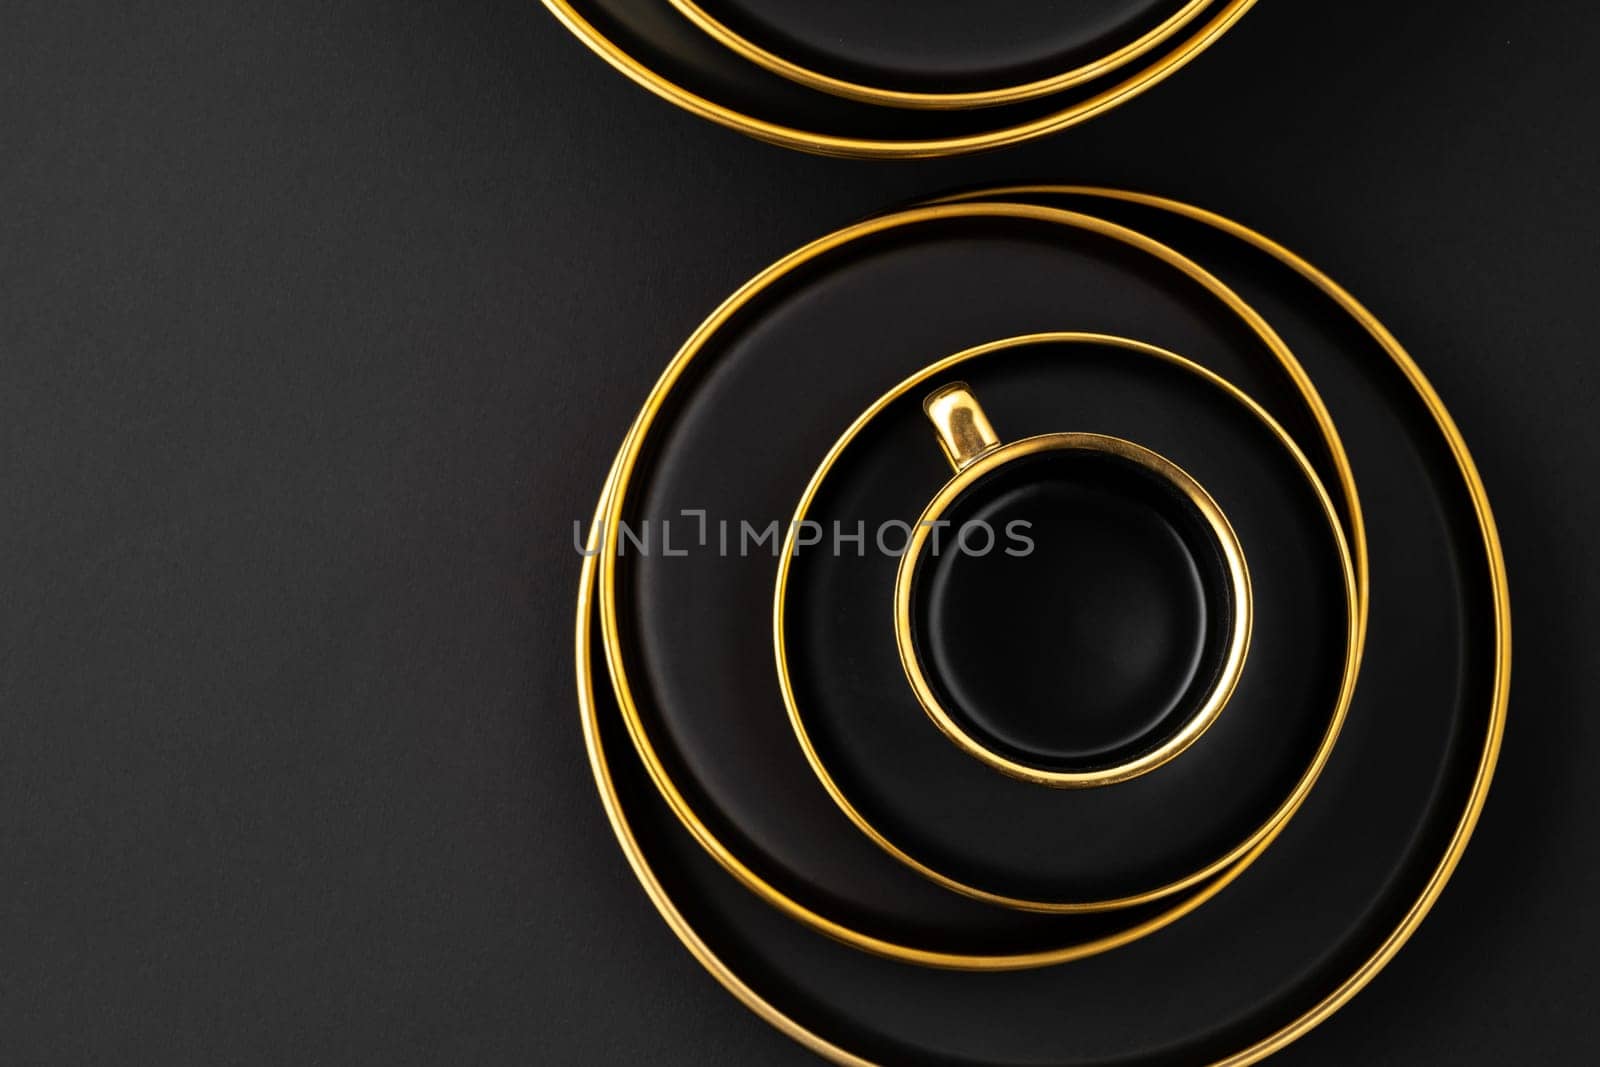 A set of black and golden ceramic plates and cup on a black background. Top view